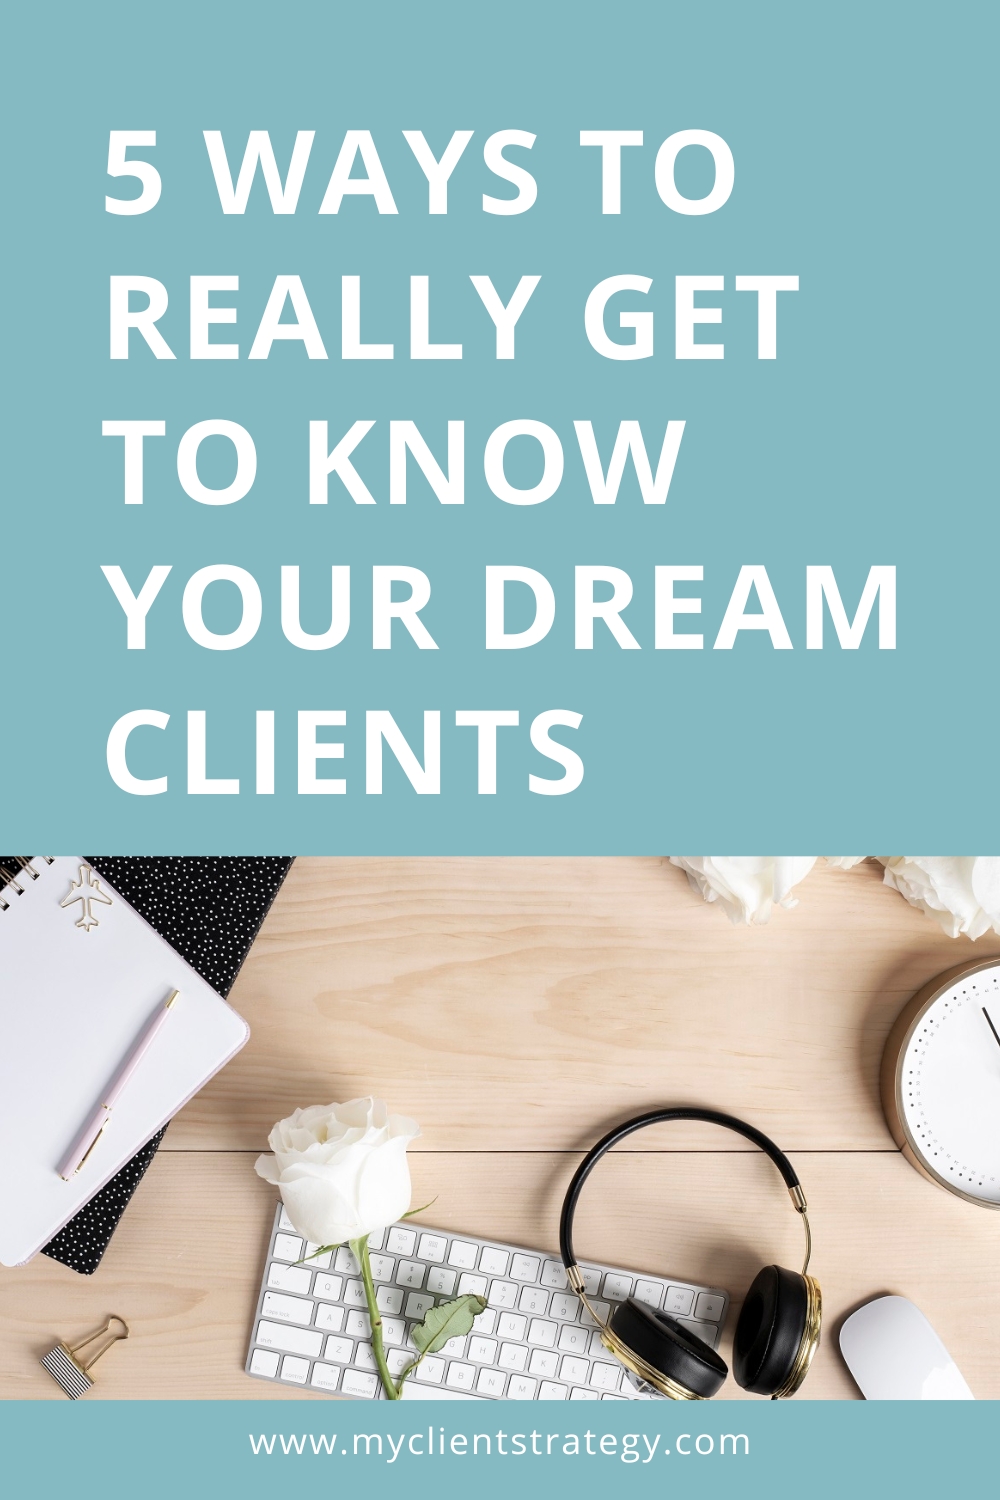 5 ways to really get to know your dream clients